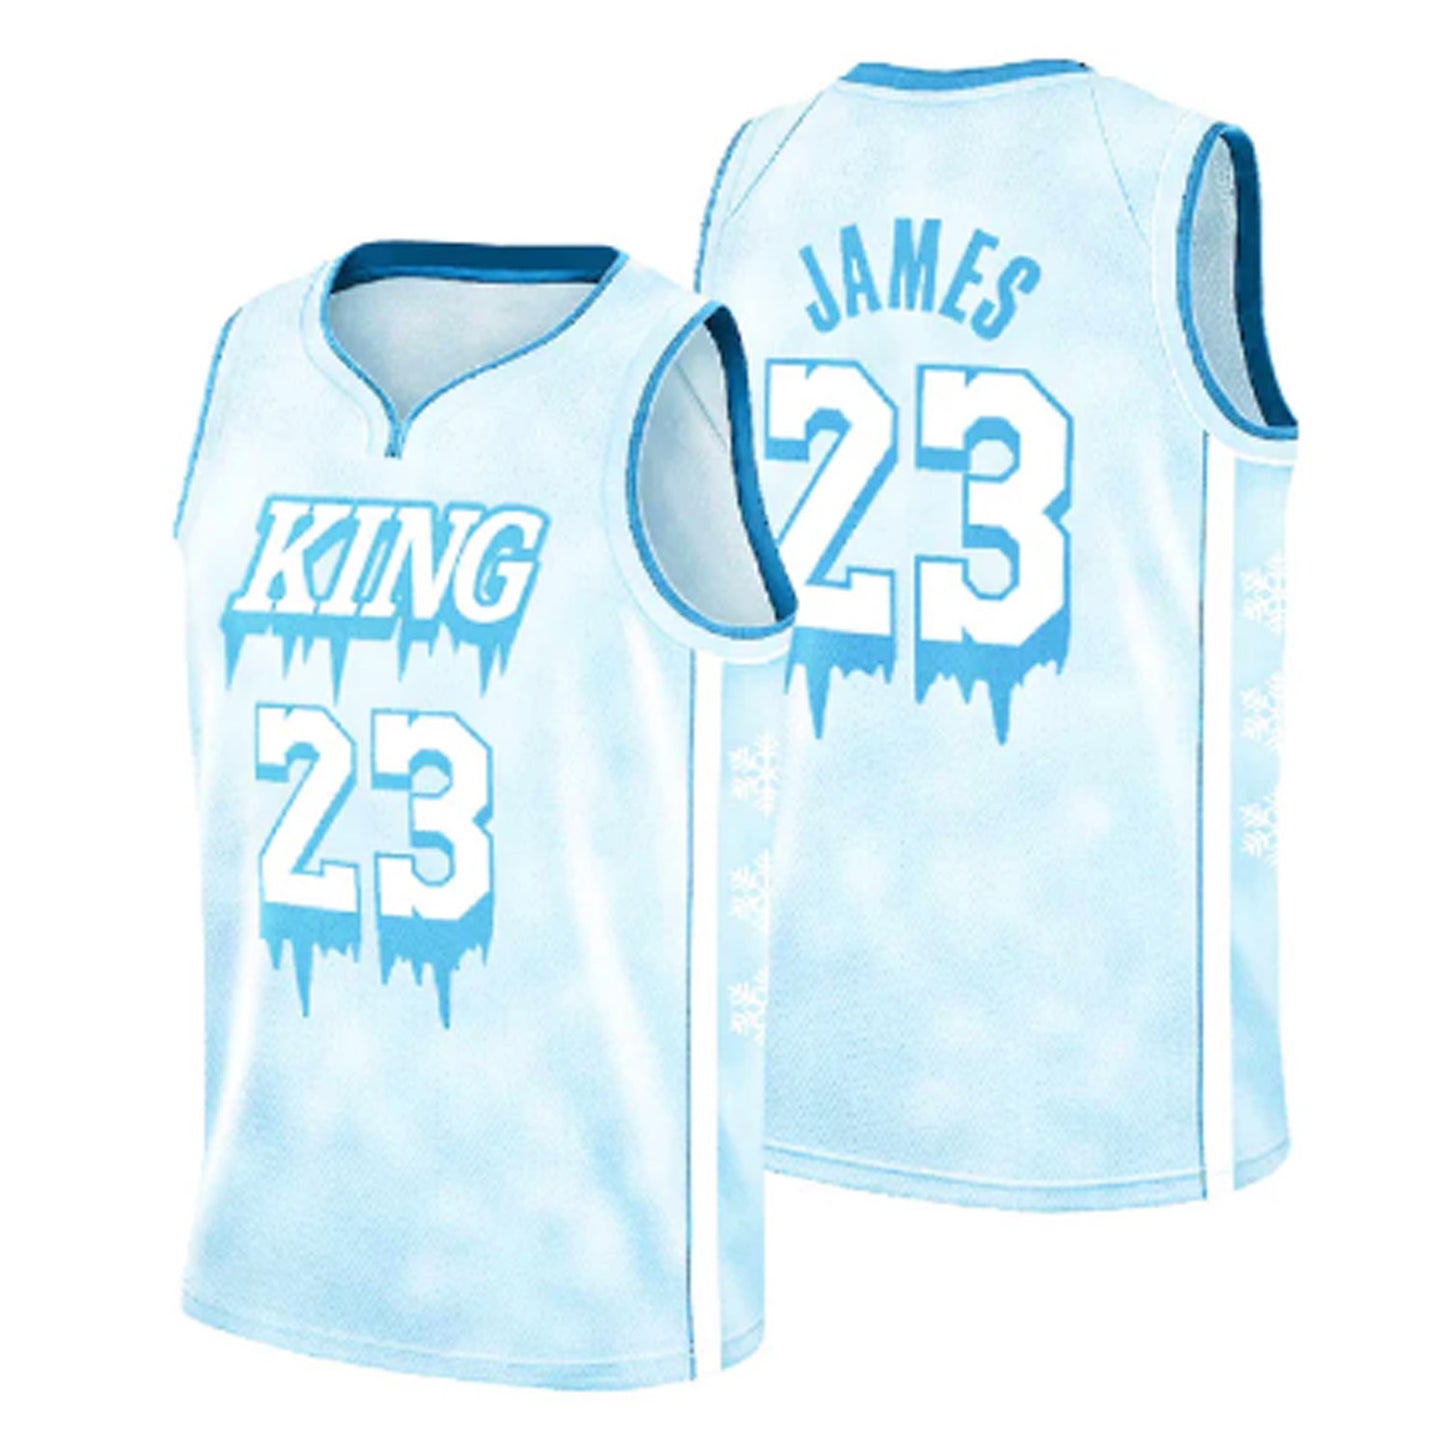 King James Icy 23 Jersey